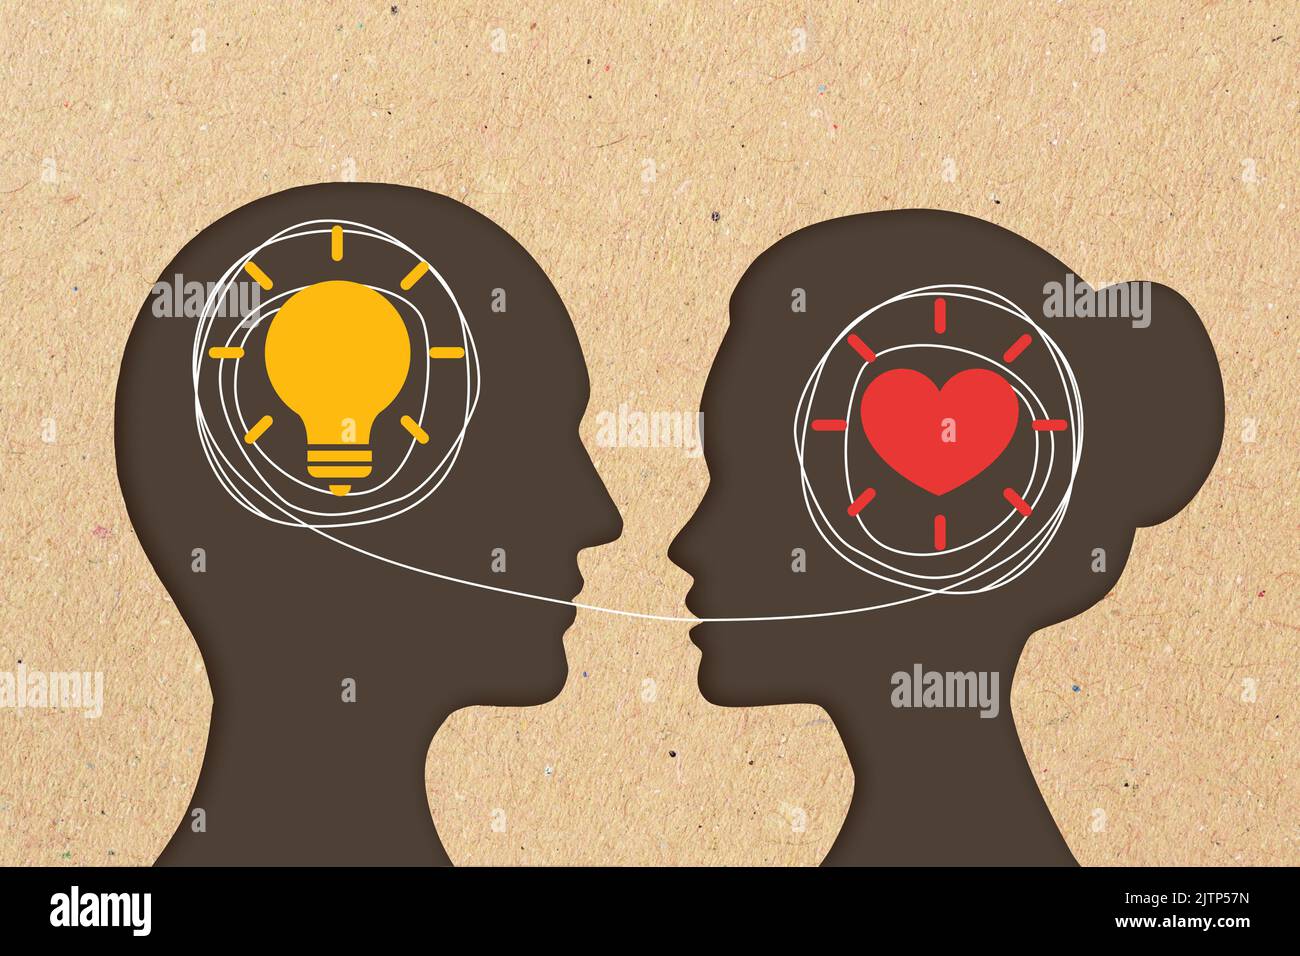 Man head silhouette with light bulb icon and woman head silhouette with heart icon - Concept of differences in communication between men and women Stock Photo